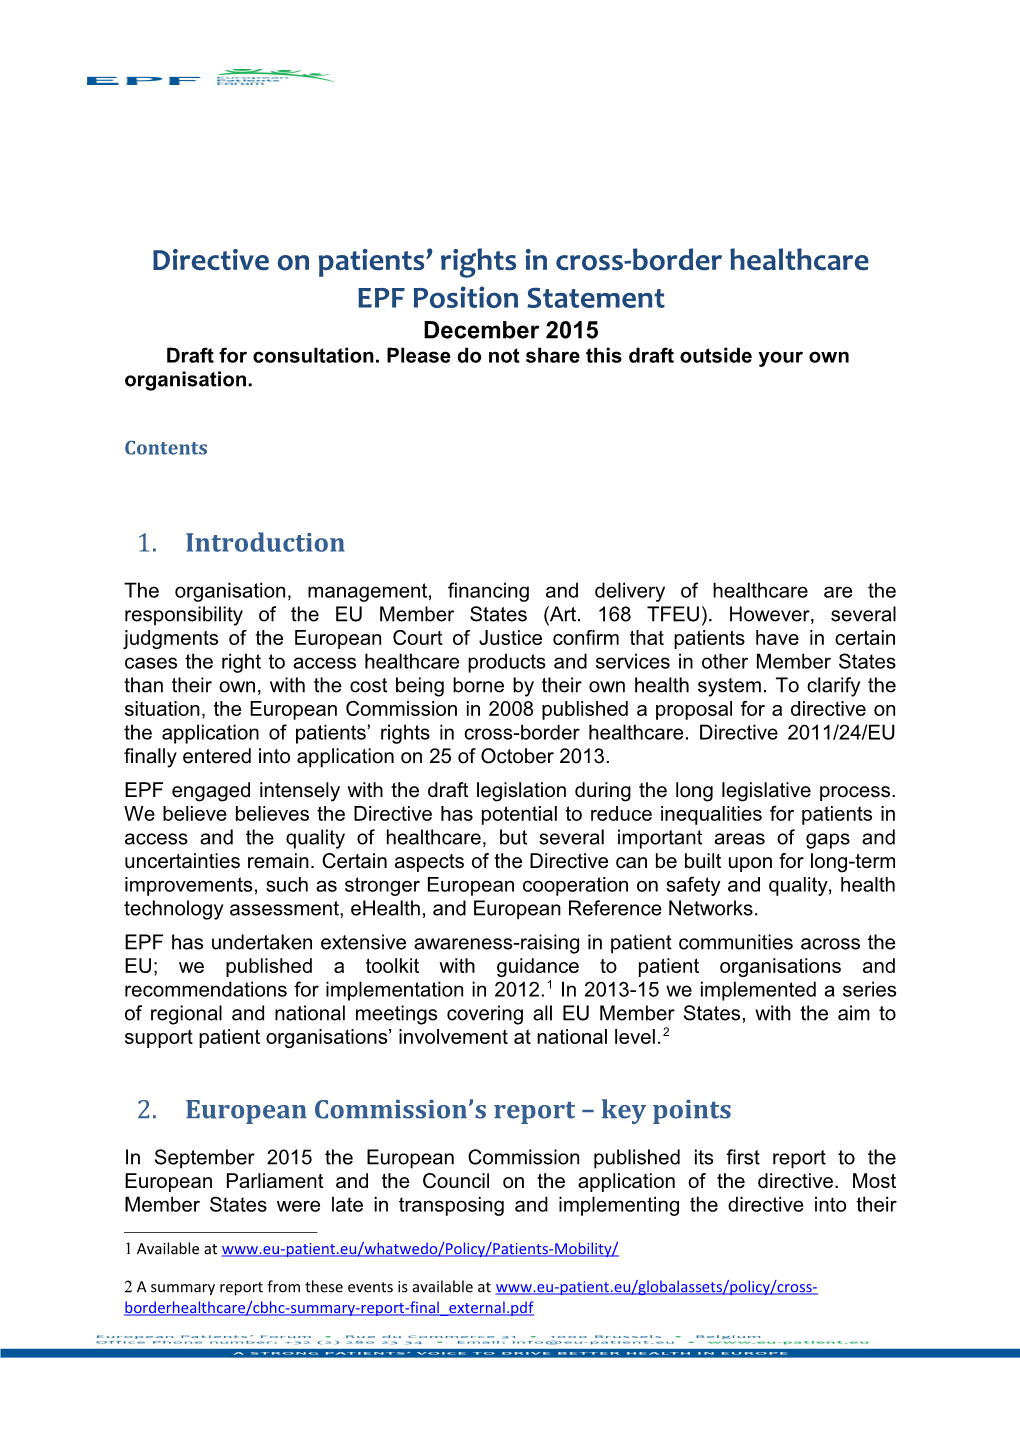 Directive on Patients Rights in Cross-Border Healthcare